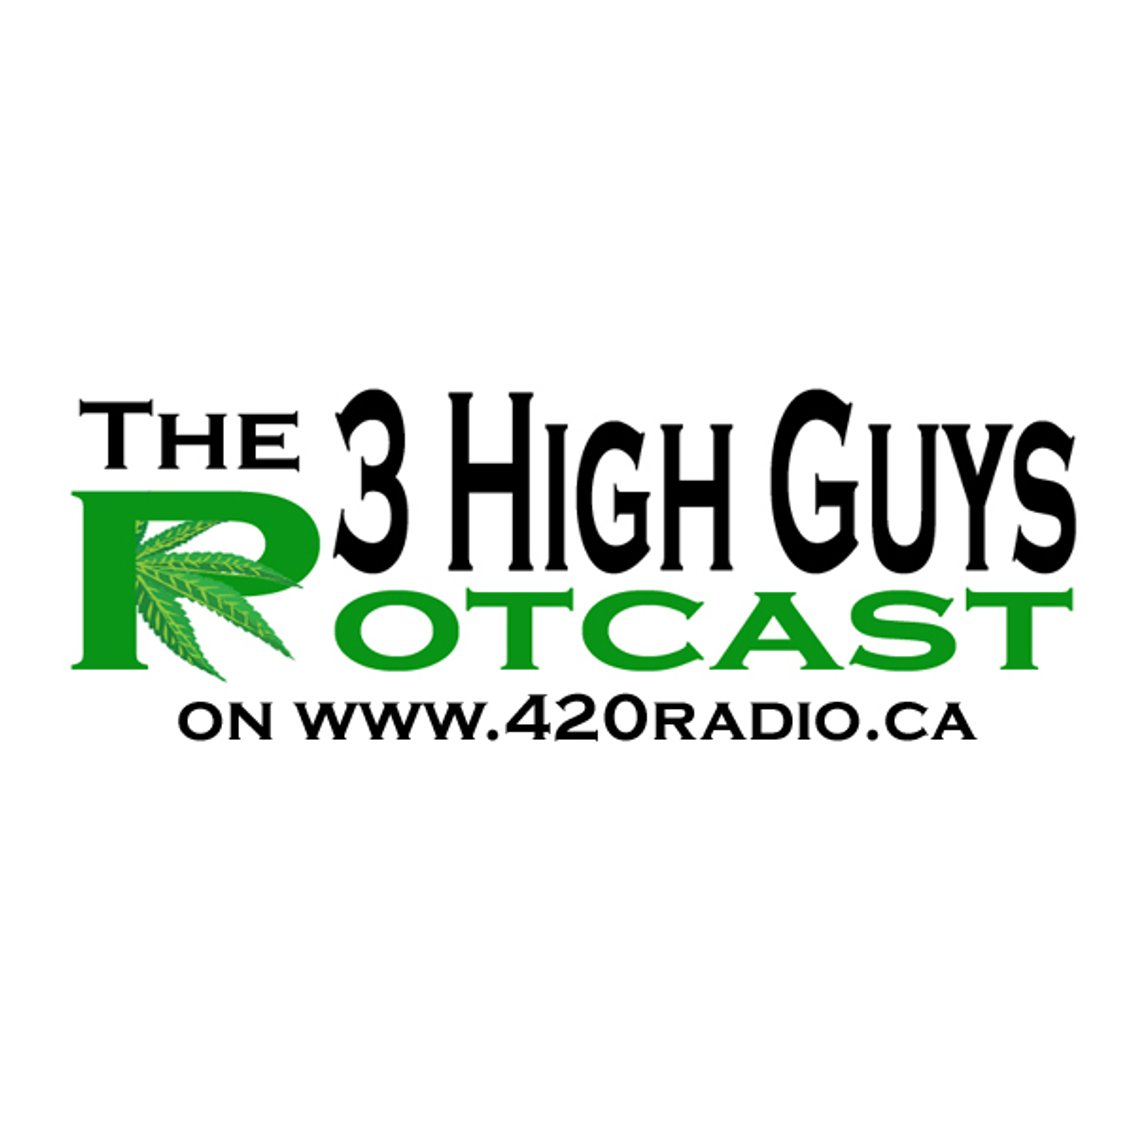 The 3 High Guys Potcast - Cover Image